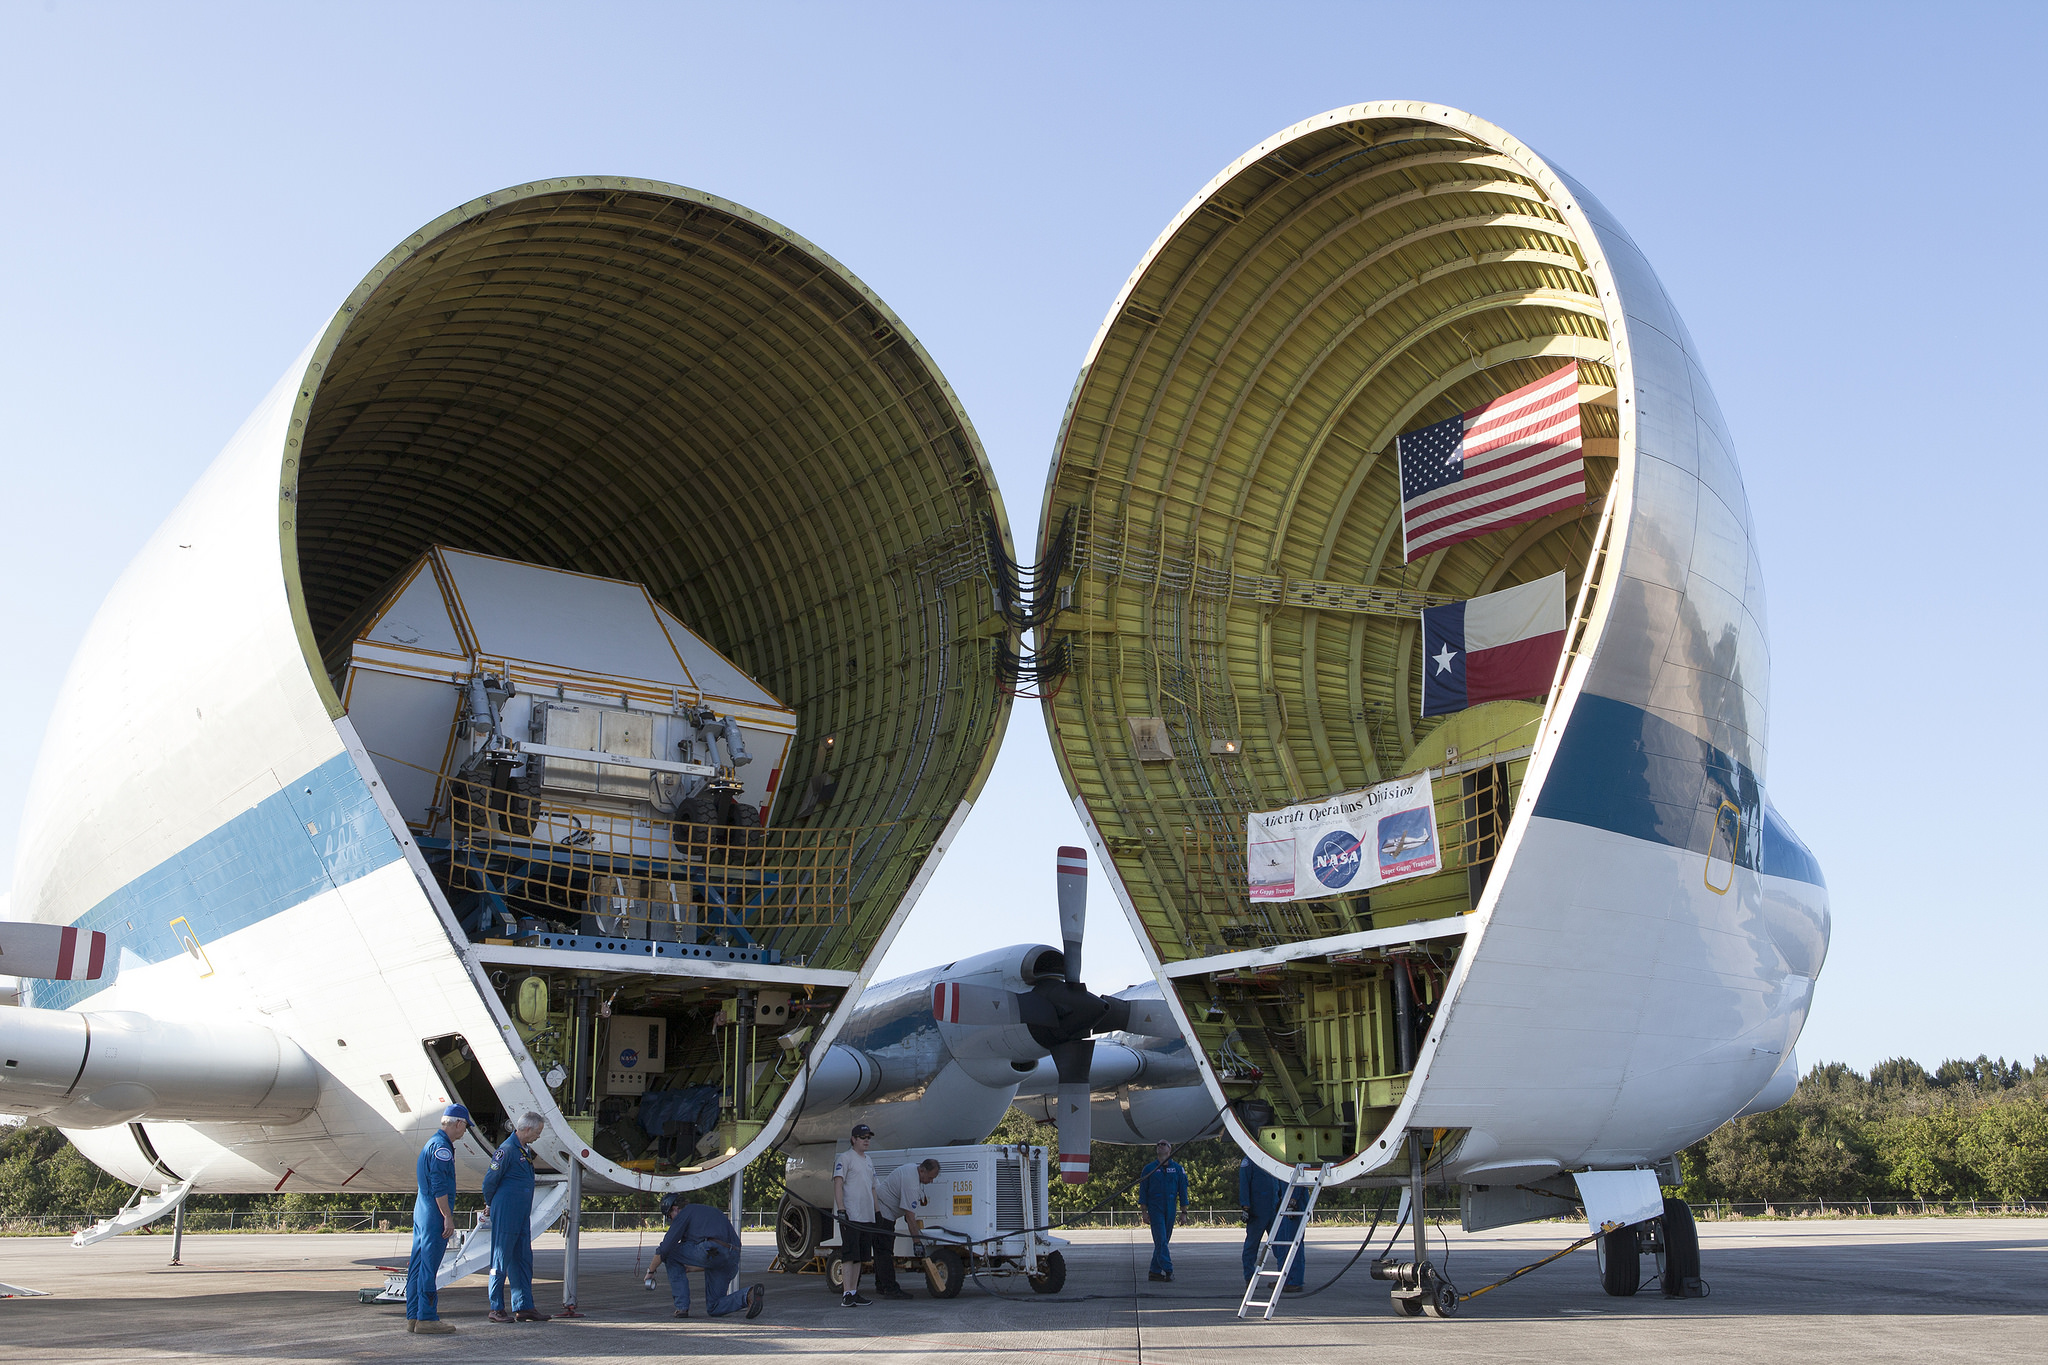 NASA’s Super Guppy aircraft arrived at Buckley Air Force Base near Denver on April 26, 2017 with the Orion test vehicle.